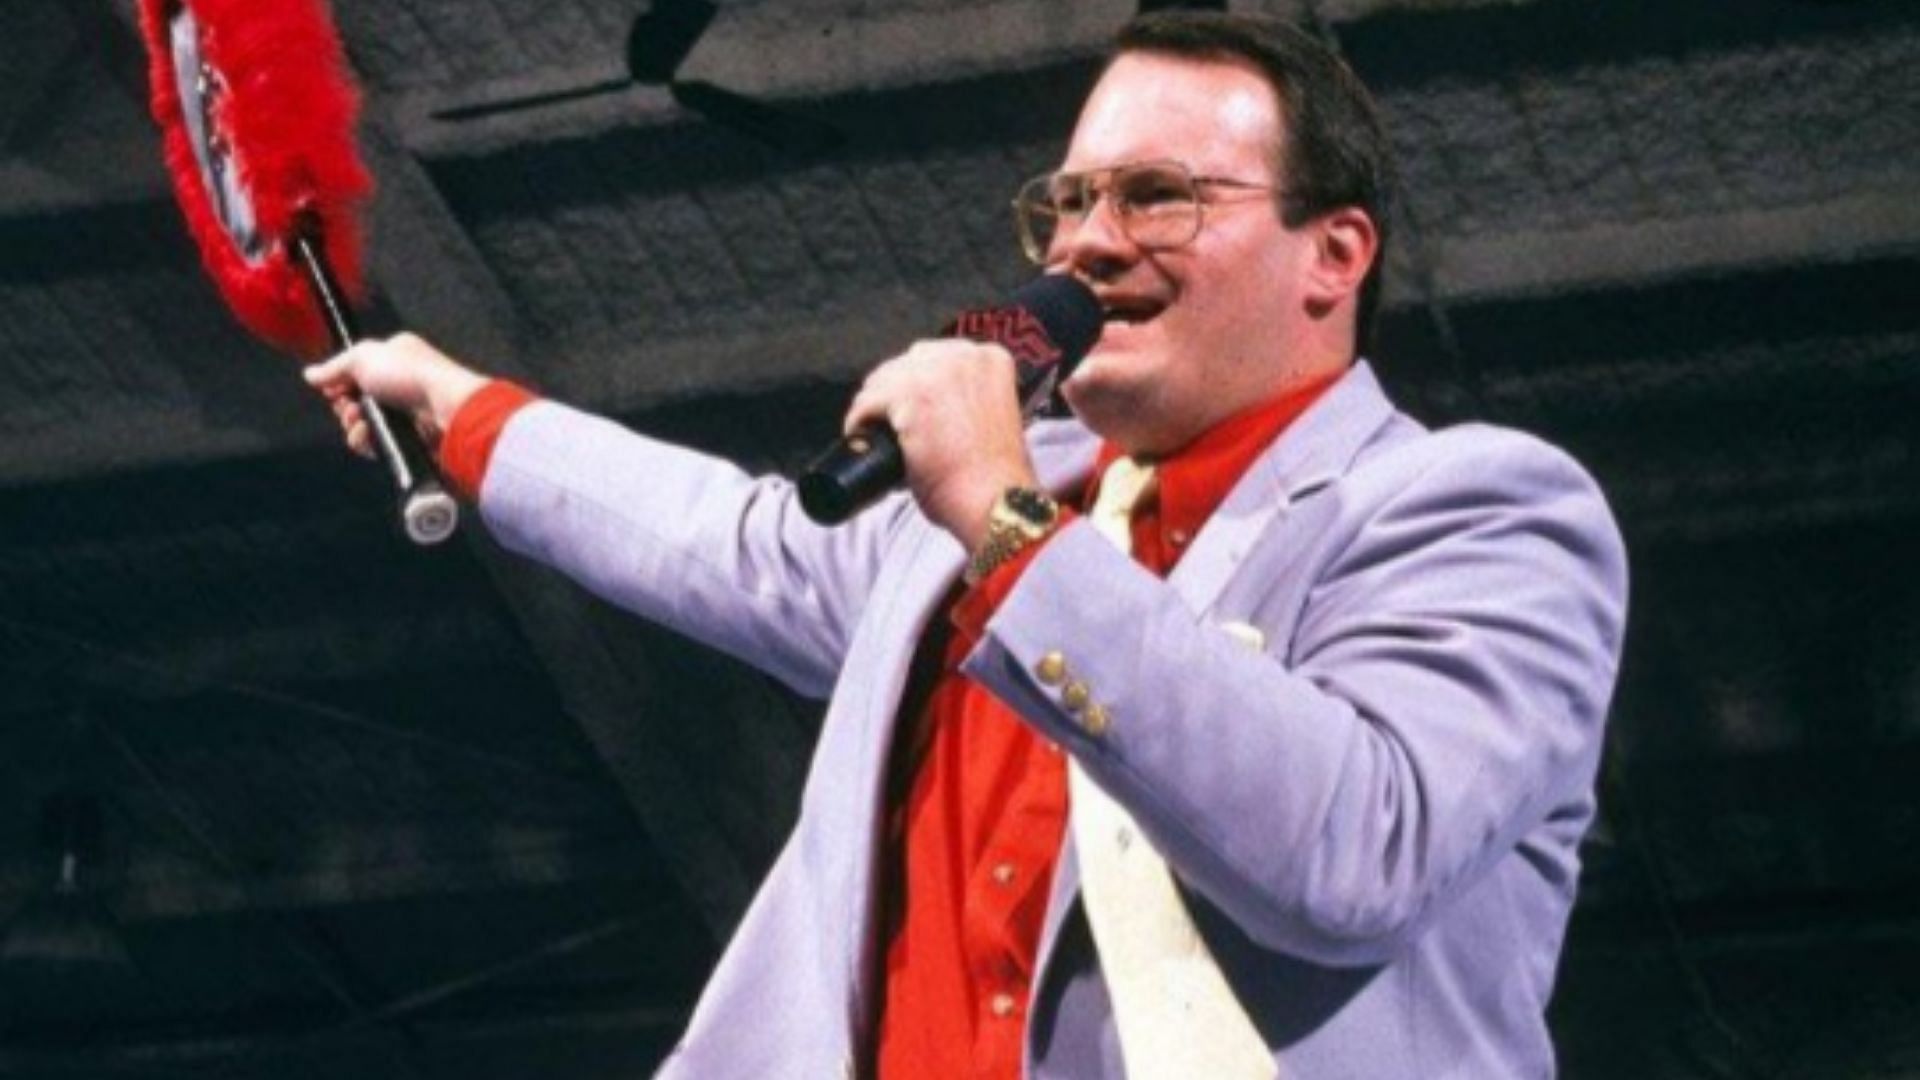 Cornette on the microphone in the WWF